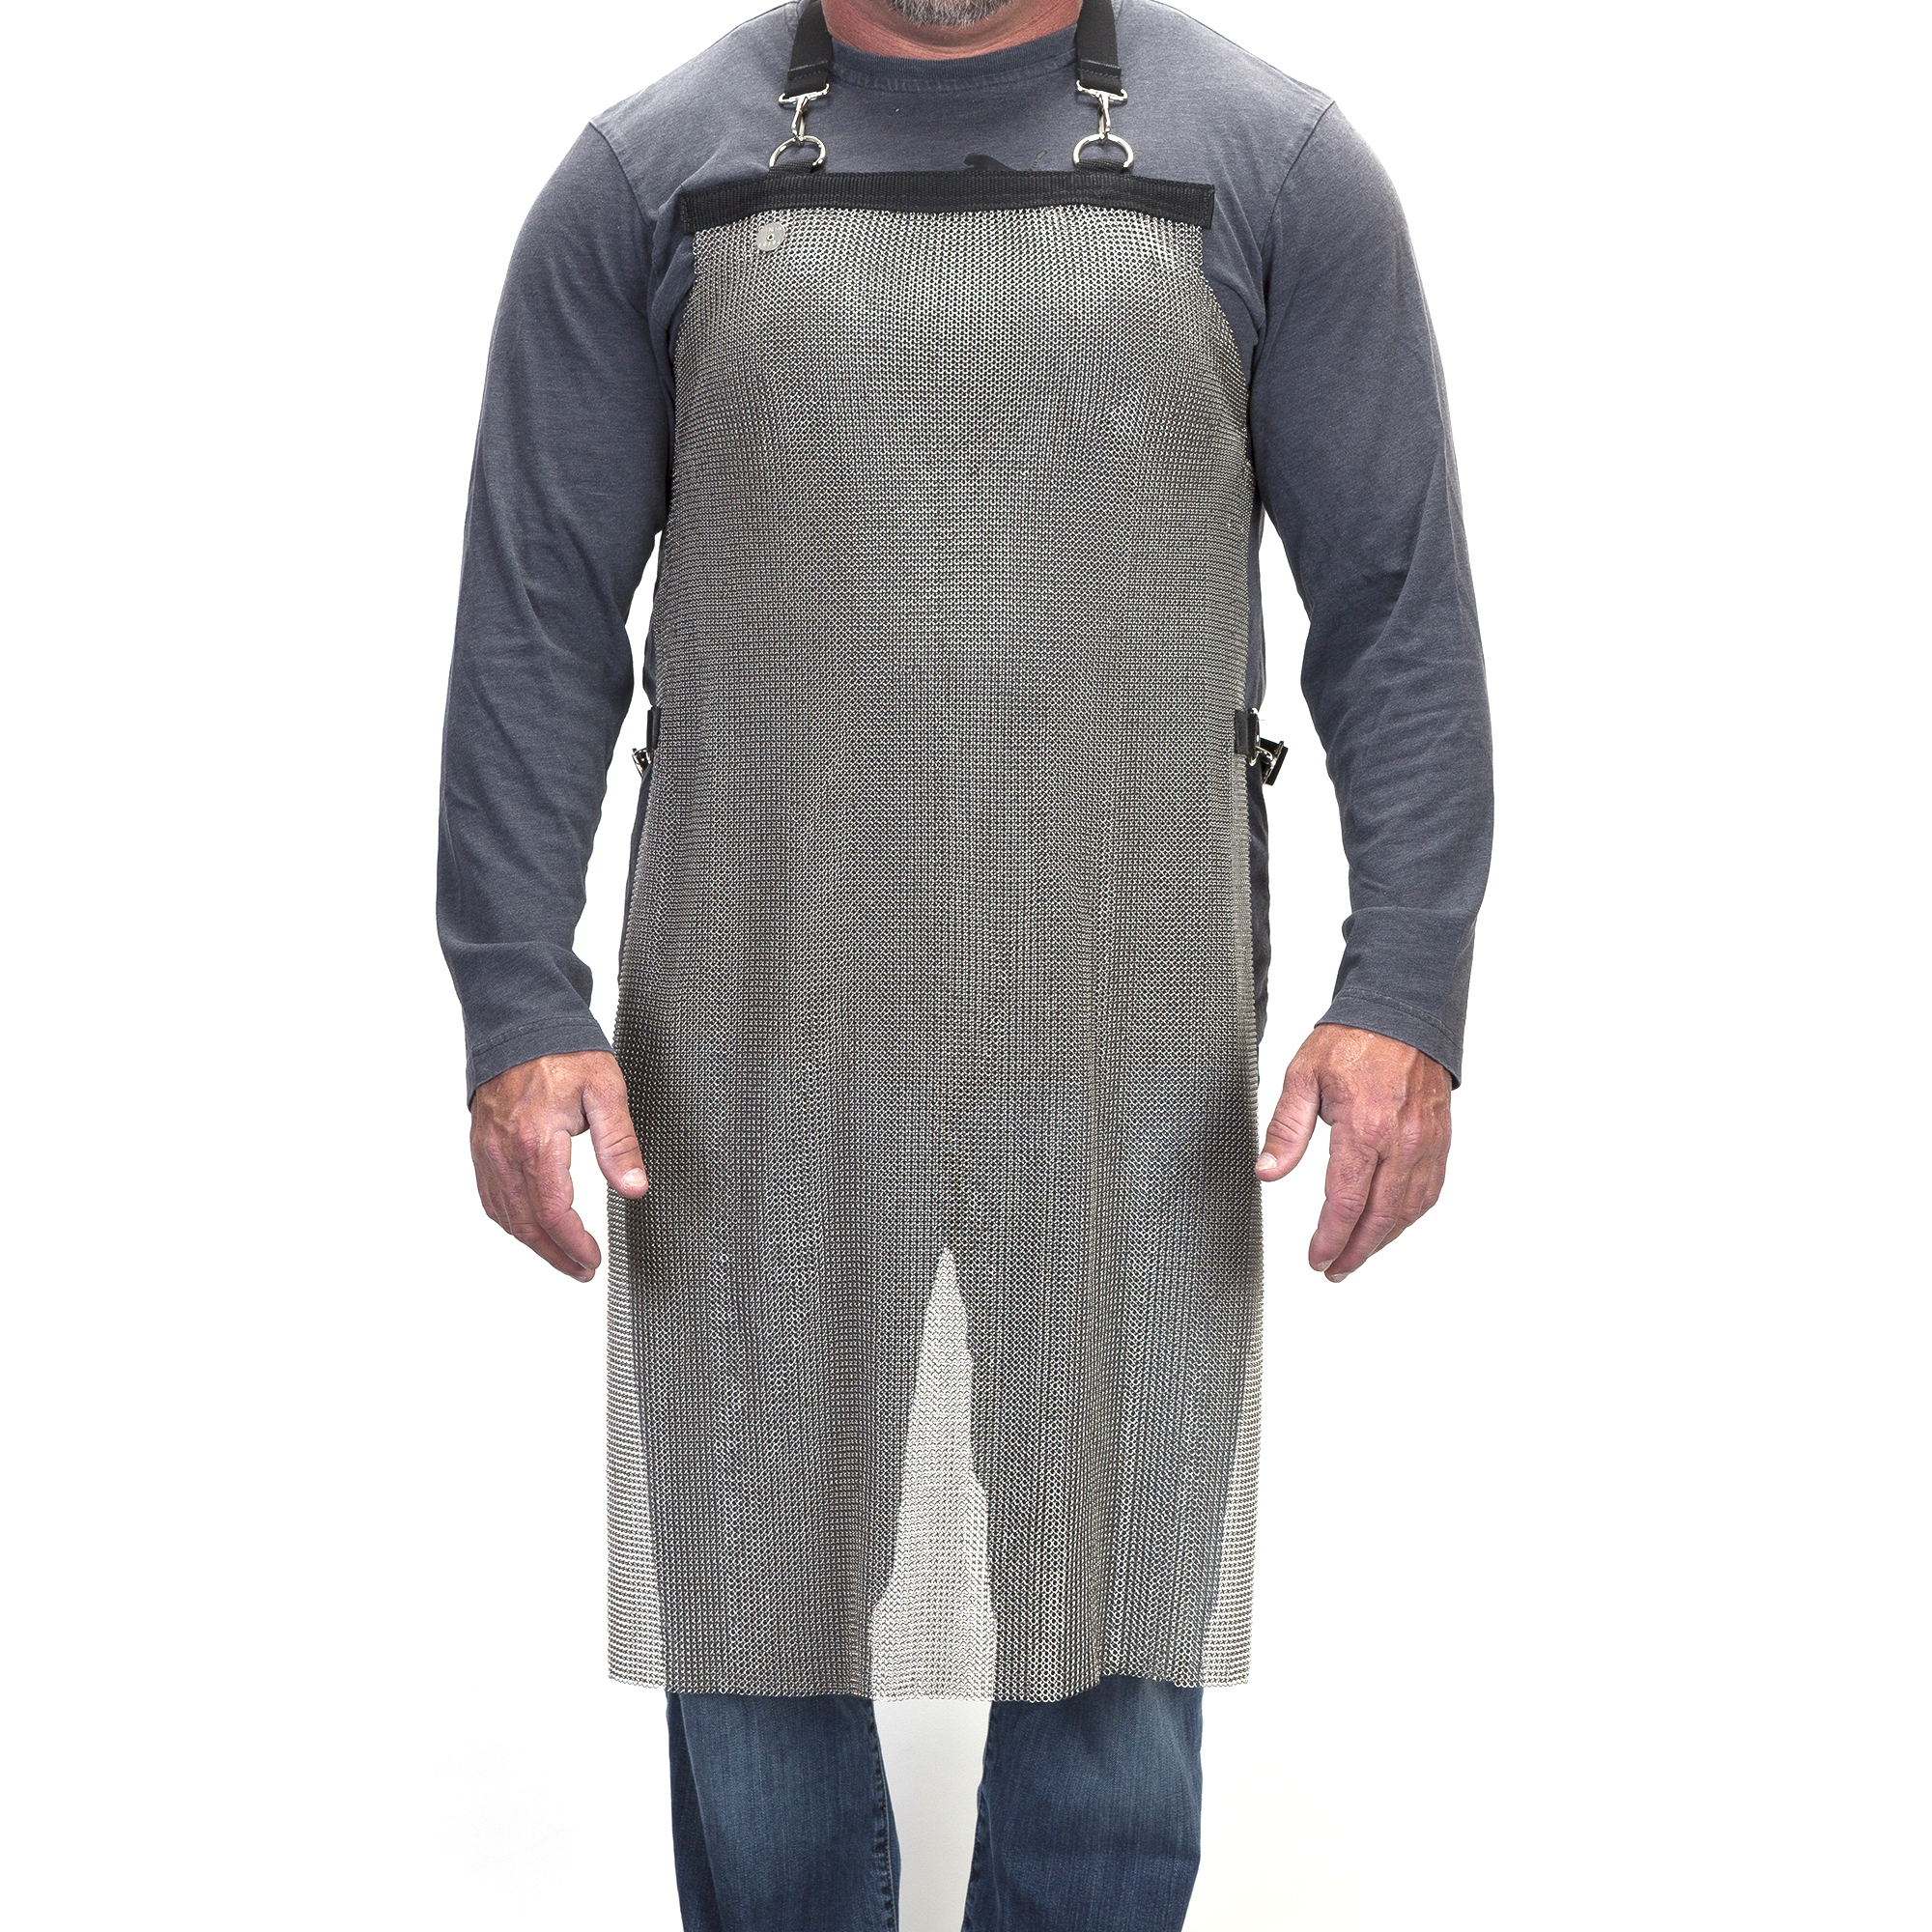 USM-2100 PIP US Mesh® Stainless Steel Mesh Apron with Adjustable Strap